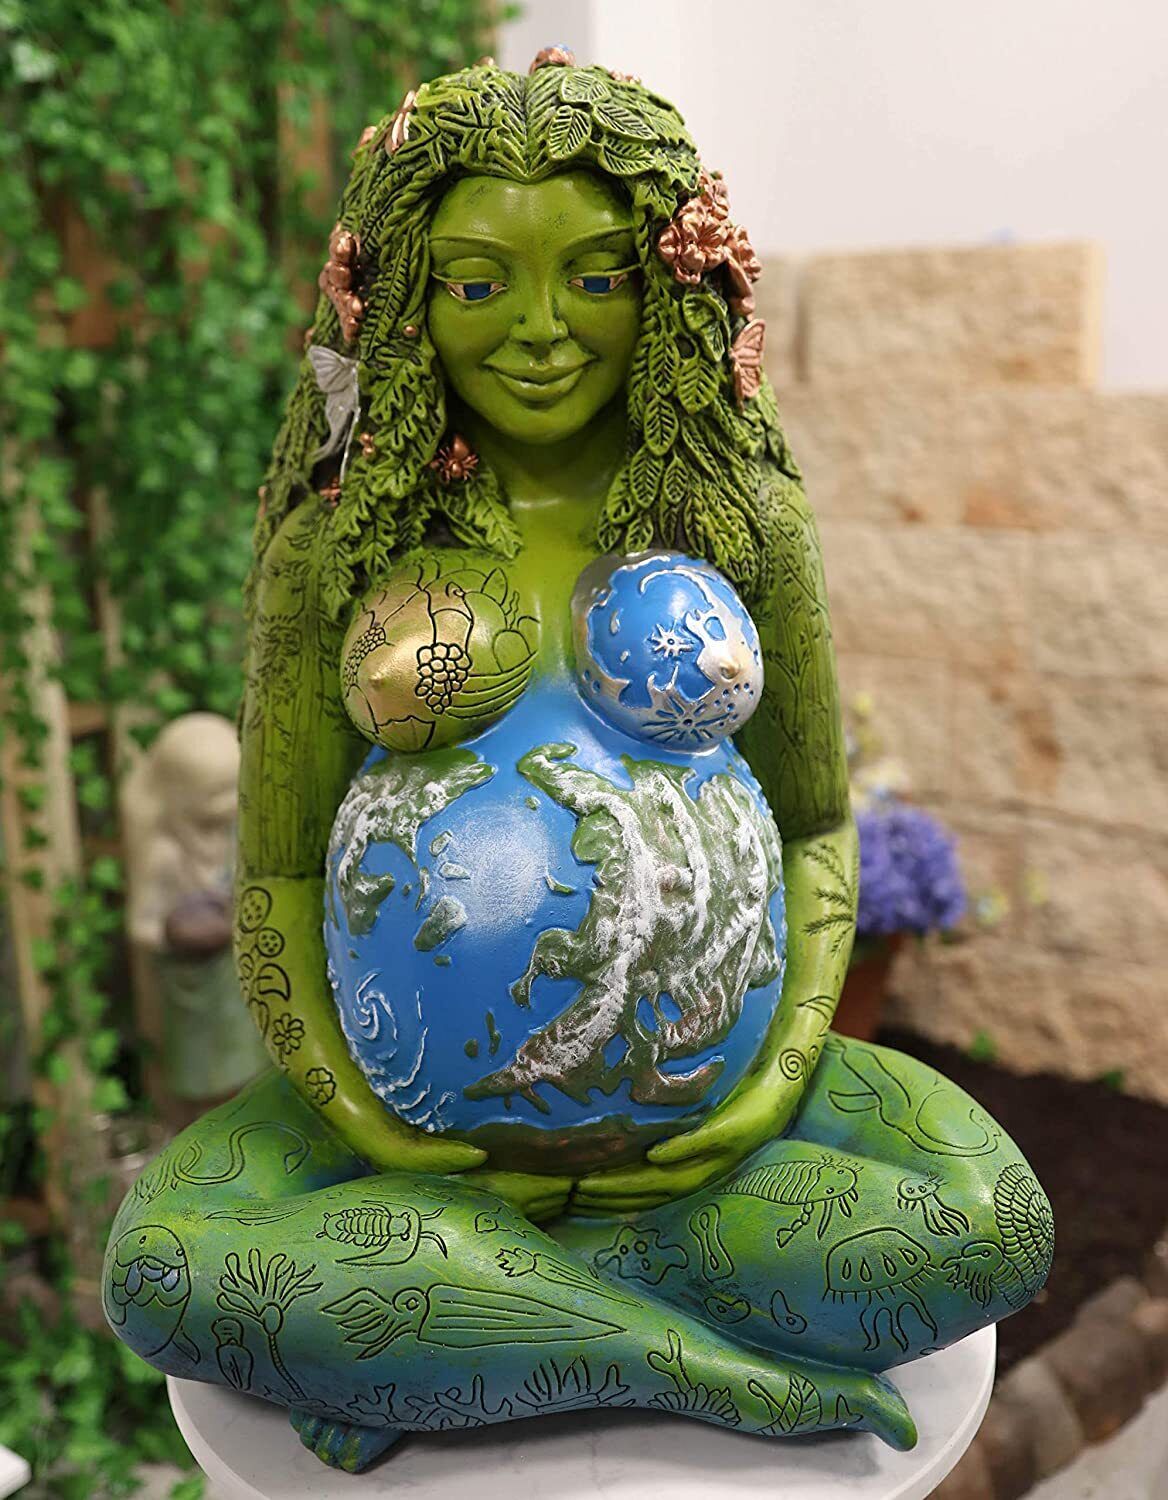 Ebros 24 Inches Tall Millennial Gaia Mother Earth Goddess Statue by Oberon Zell